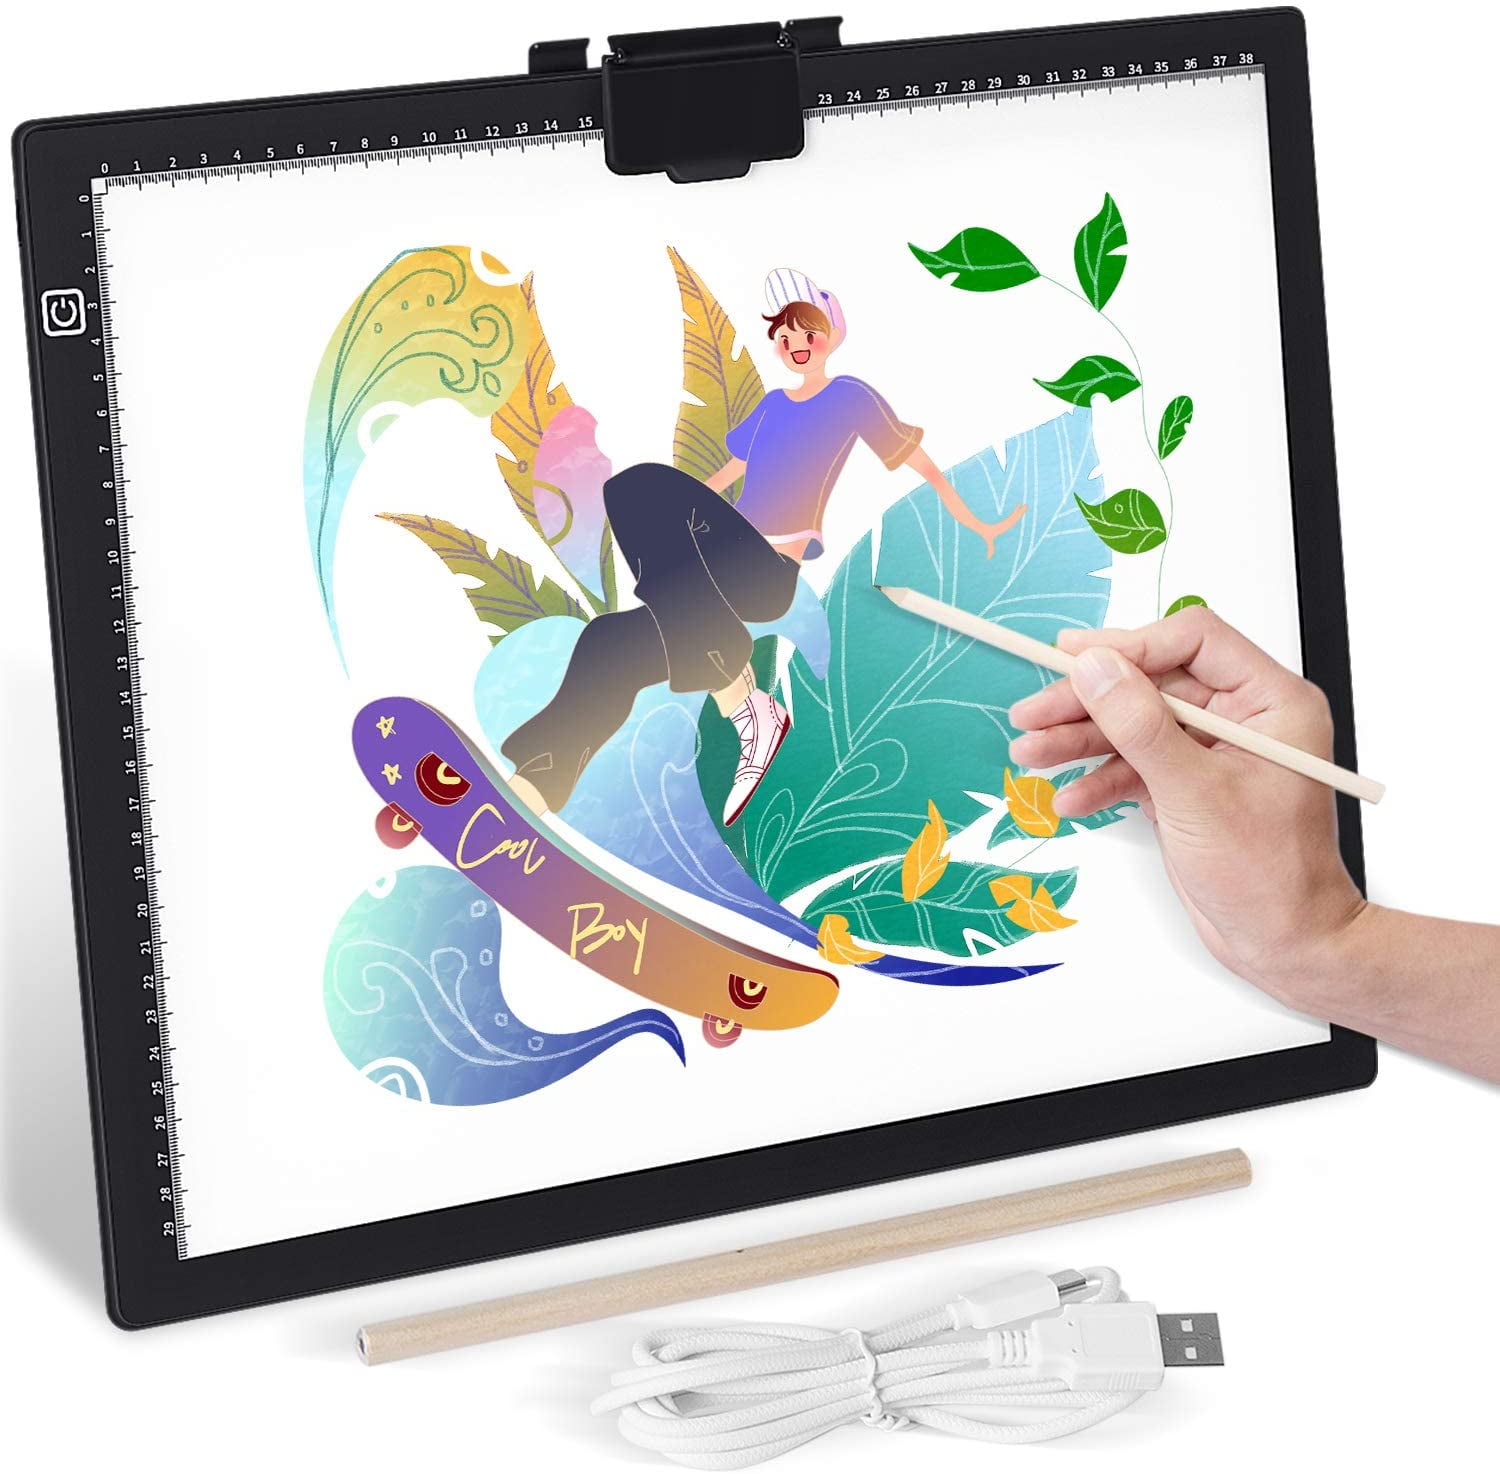  LED Light Pad Light Board for Diamond Painting - Ultra-Thin  Magnetic Tracing Light Box with USB Powered for Artists Drawing 2D DIY Diamond  Painting Sketching Tattoo Animation Designing,A2 Light pad